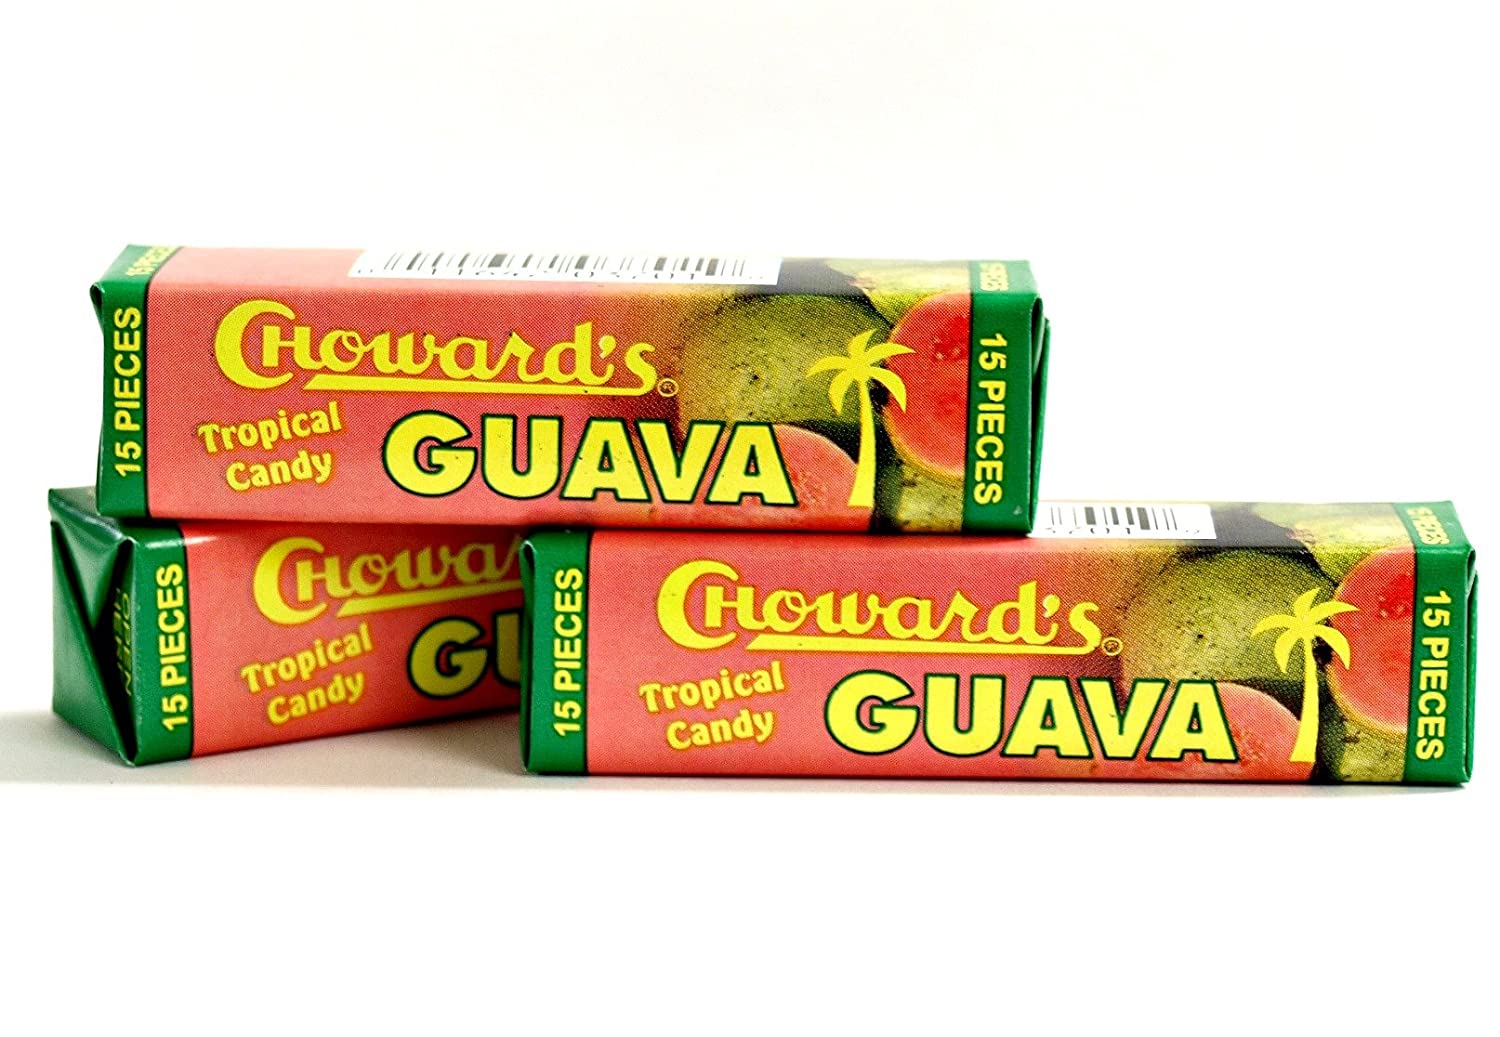 CHOWRDS'S GUAVA MINTS